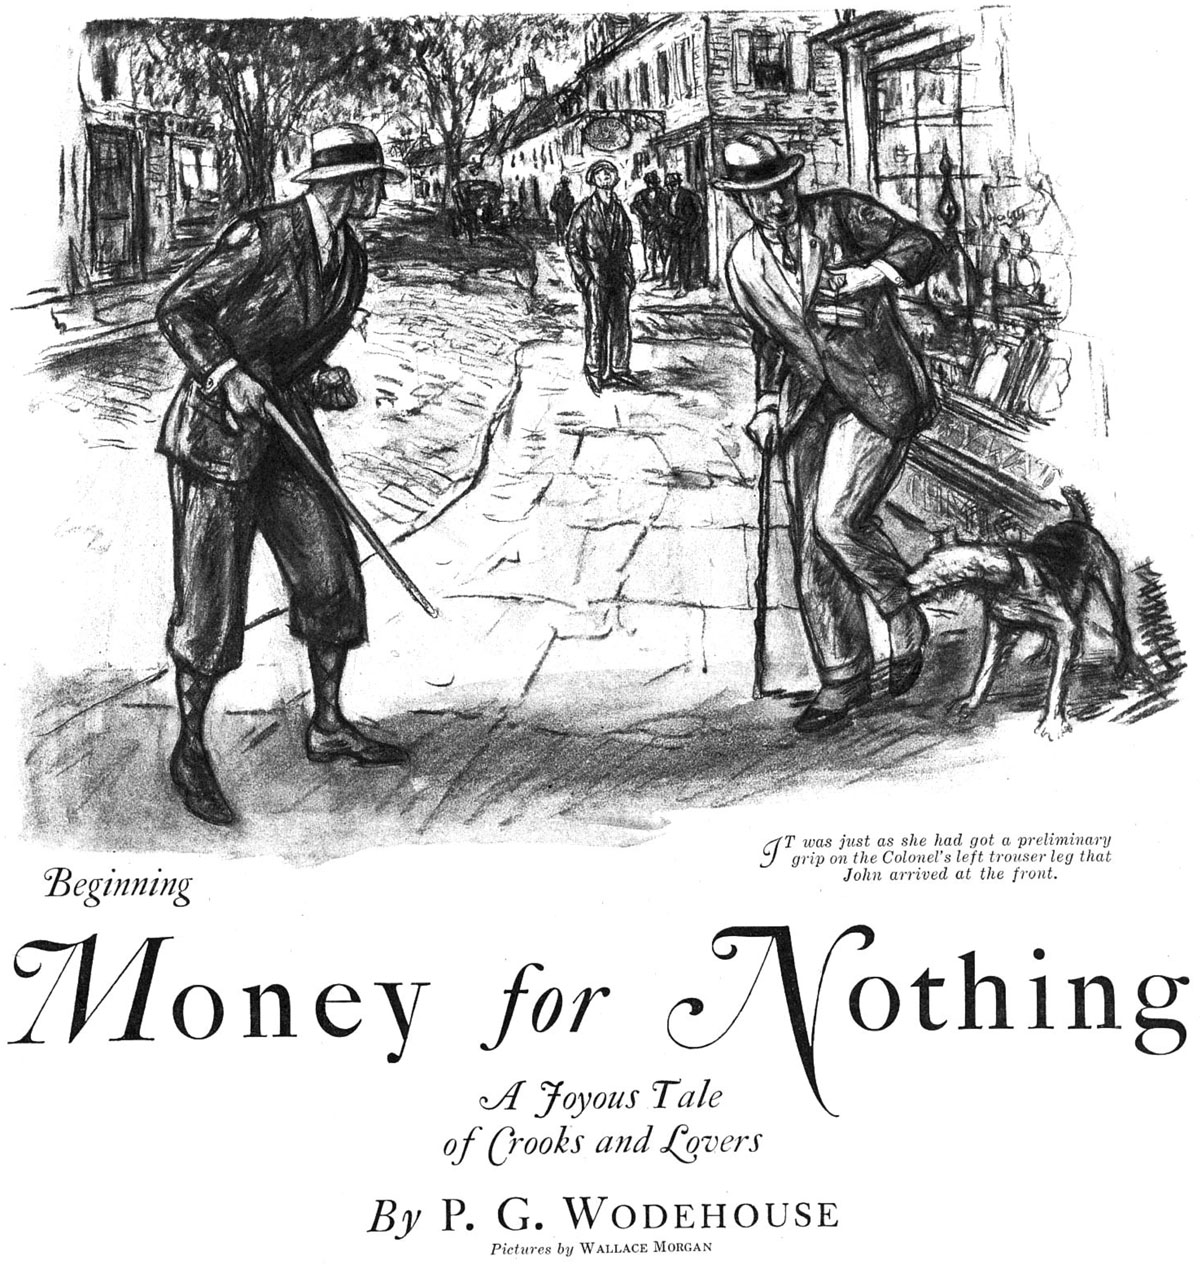 Money for Nothing - Episode 1